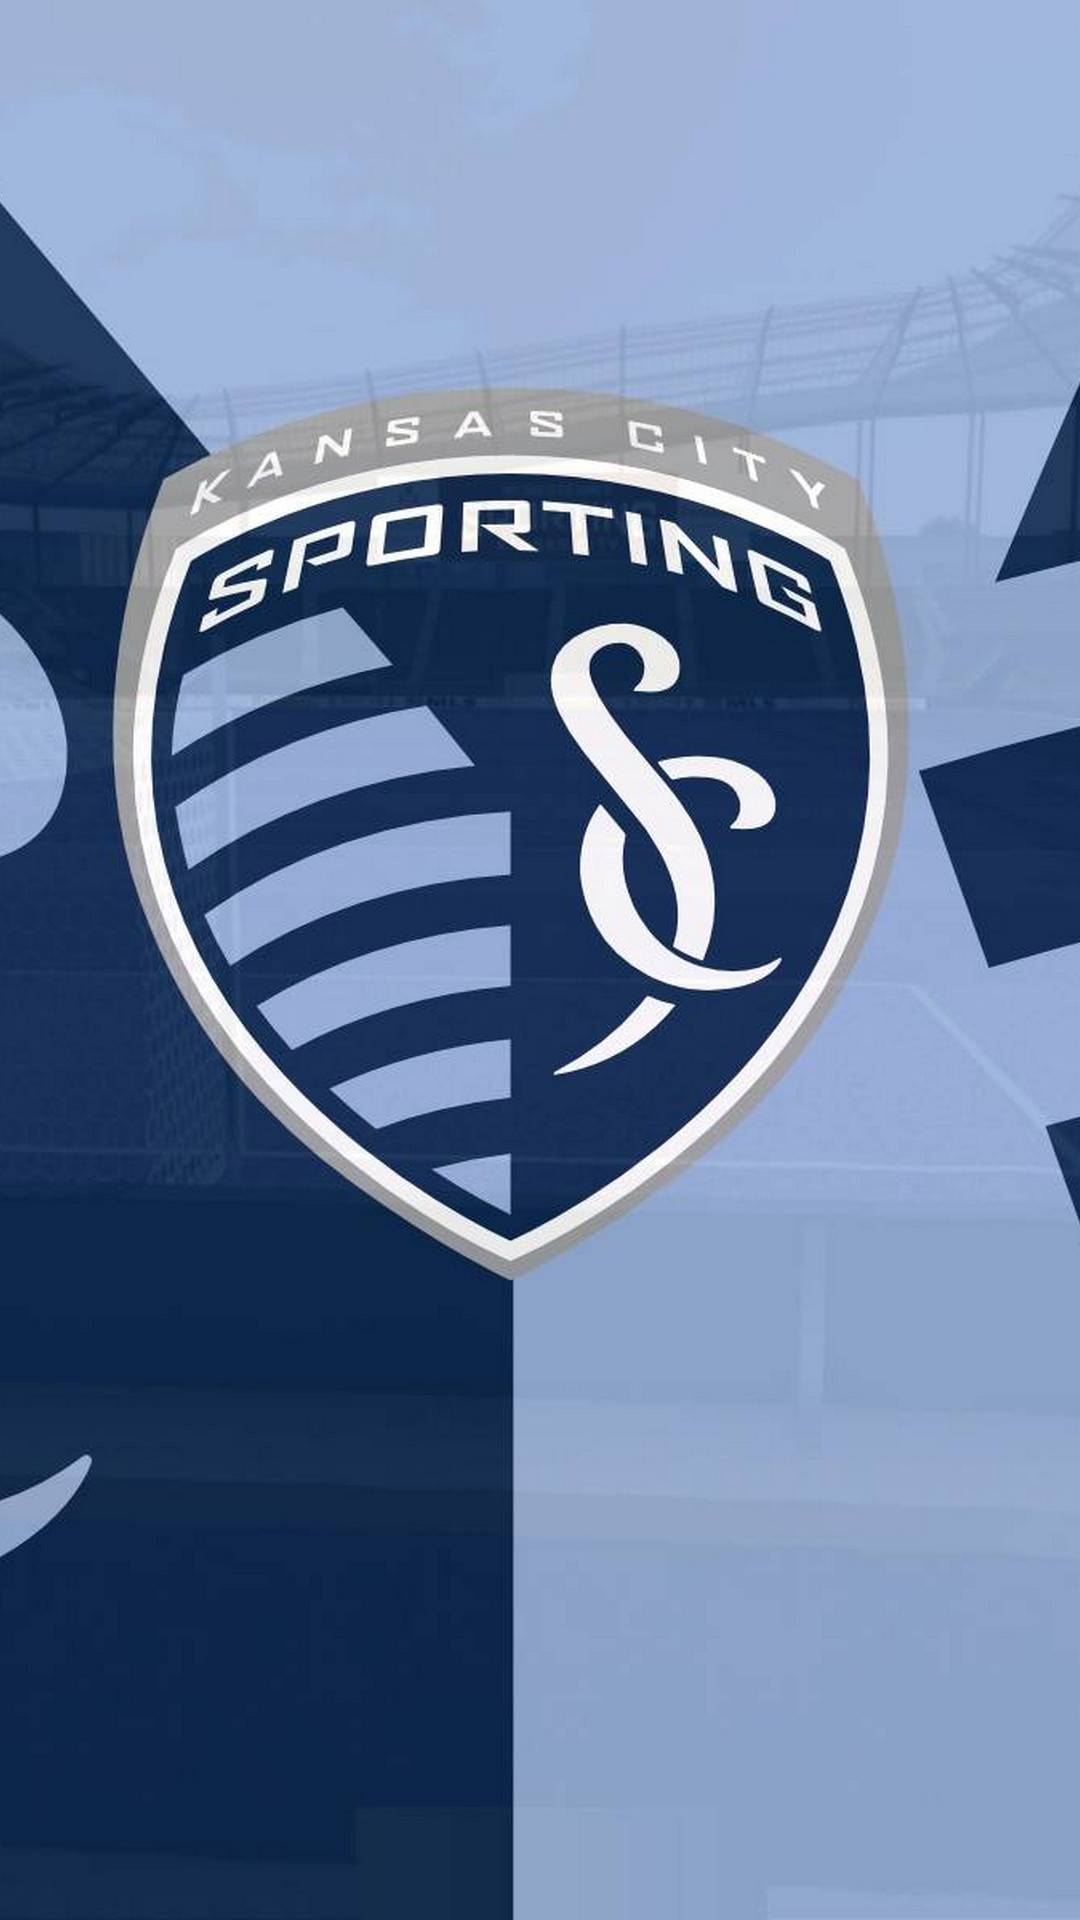 iPhone Wallpaper HD Sporting KC With high-resolution 1080X1920 pixel. You can use this wallpaper for your Desktop Computers, Mac Screensavers, Windows Backgrounds, iPhone Wallpapers, Tablet or Android Lock screen and another Mobile device